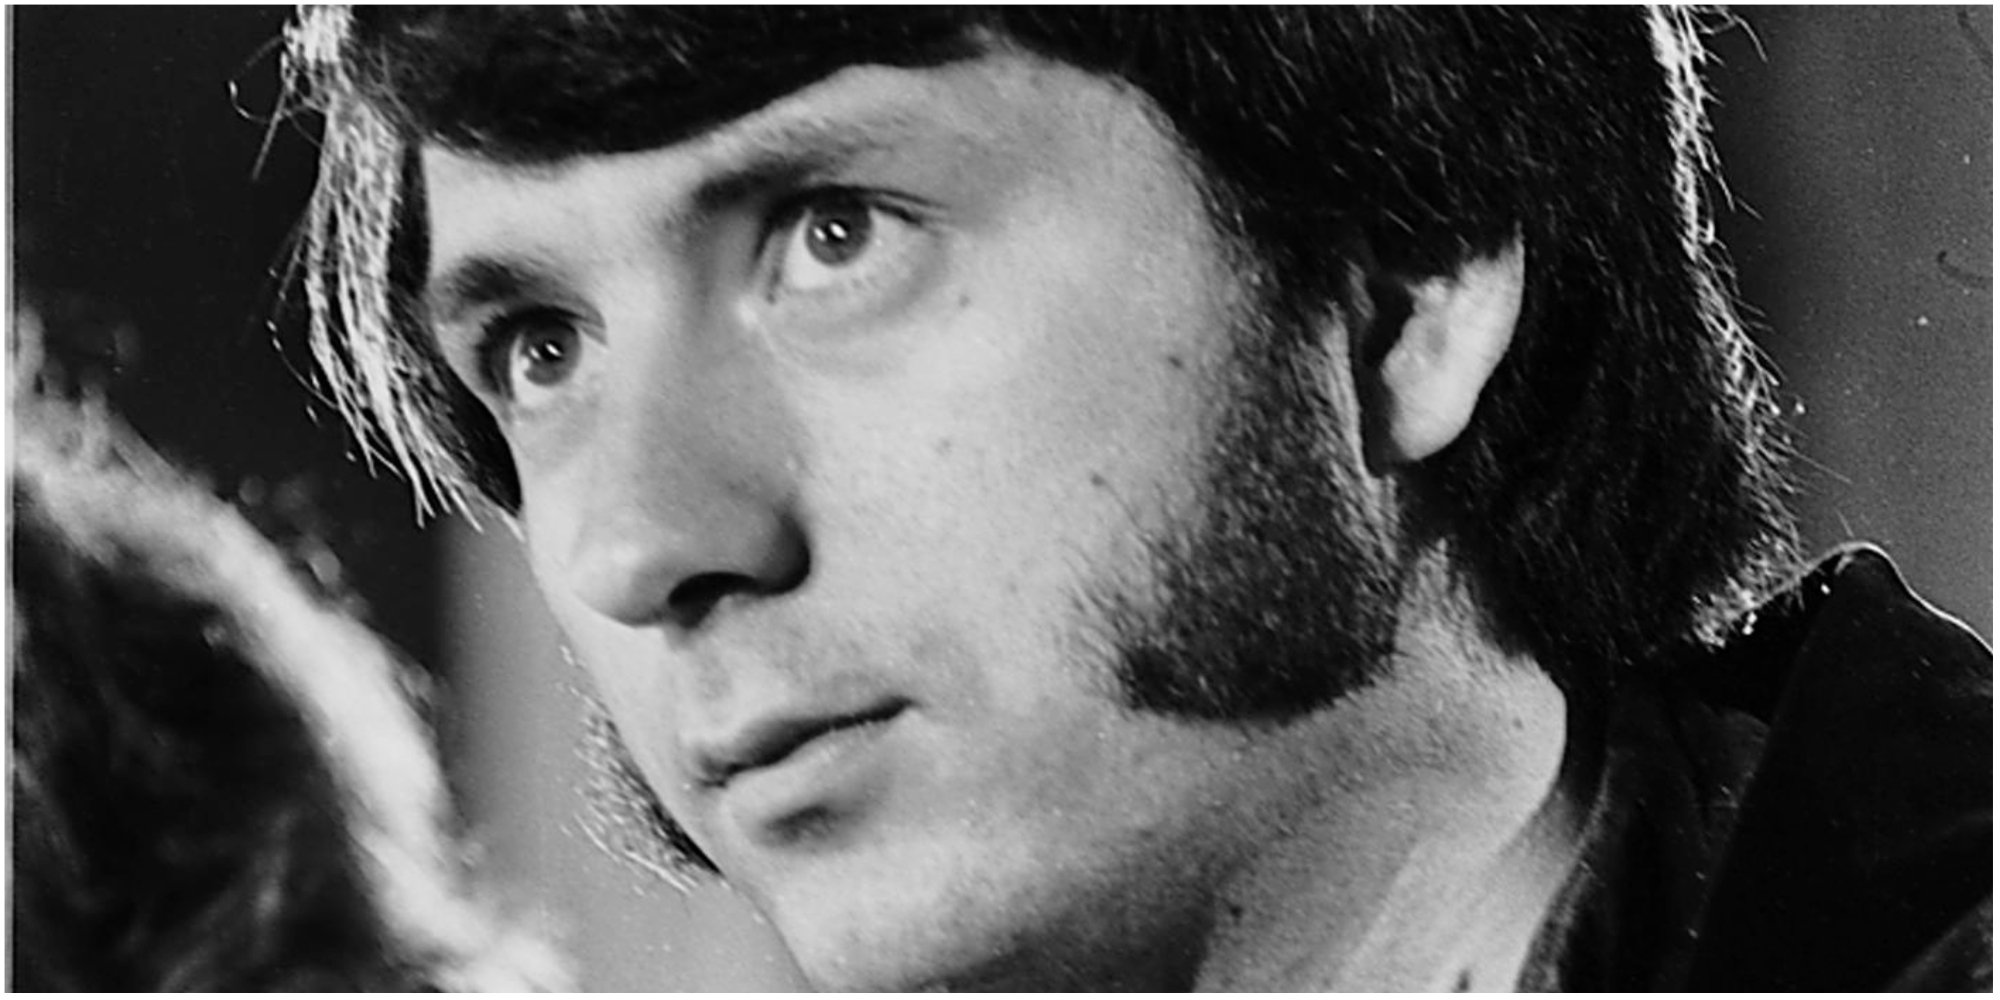 Mike Nesmith of The Monkees at their press conference at the Brighton Hotel in Sydney on 16 September 1968.